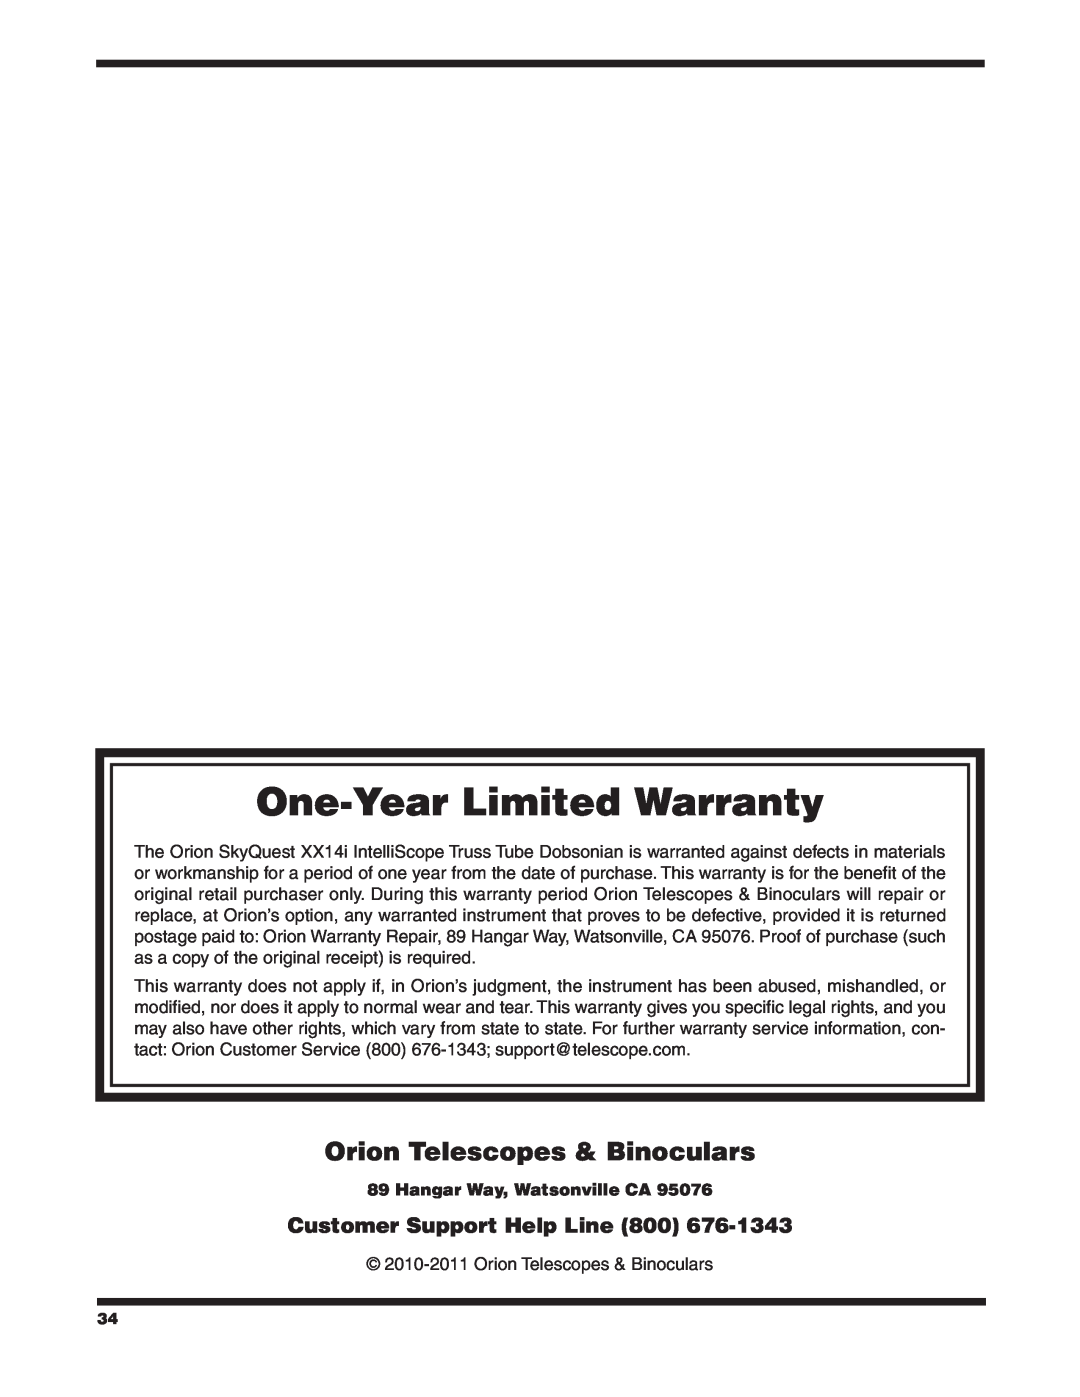 Orion XX14I instruction manual Orion Telescopes & Binoculars, One-Year Limited Warranty, Customer Support Help Line 